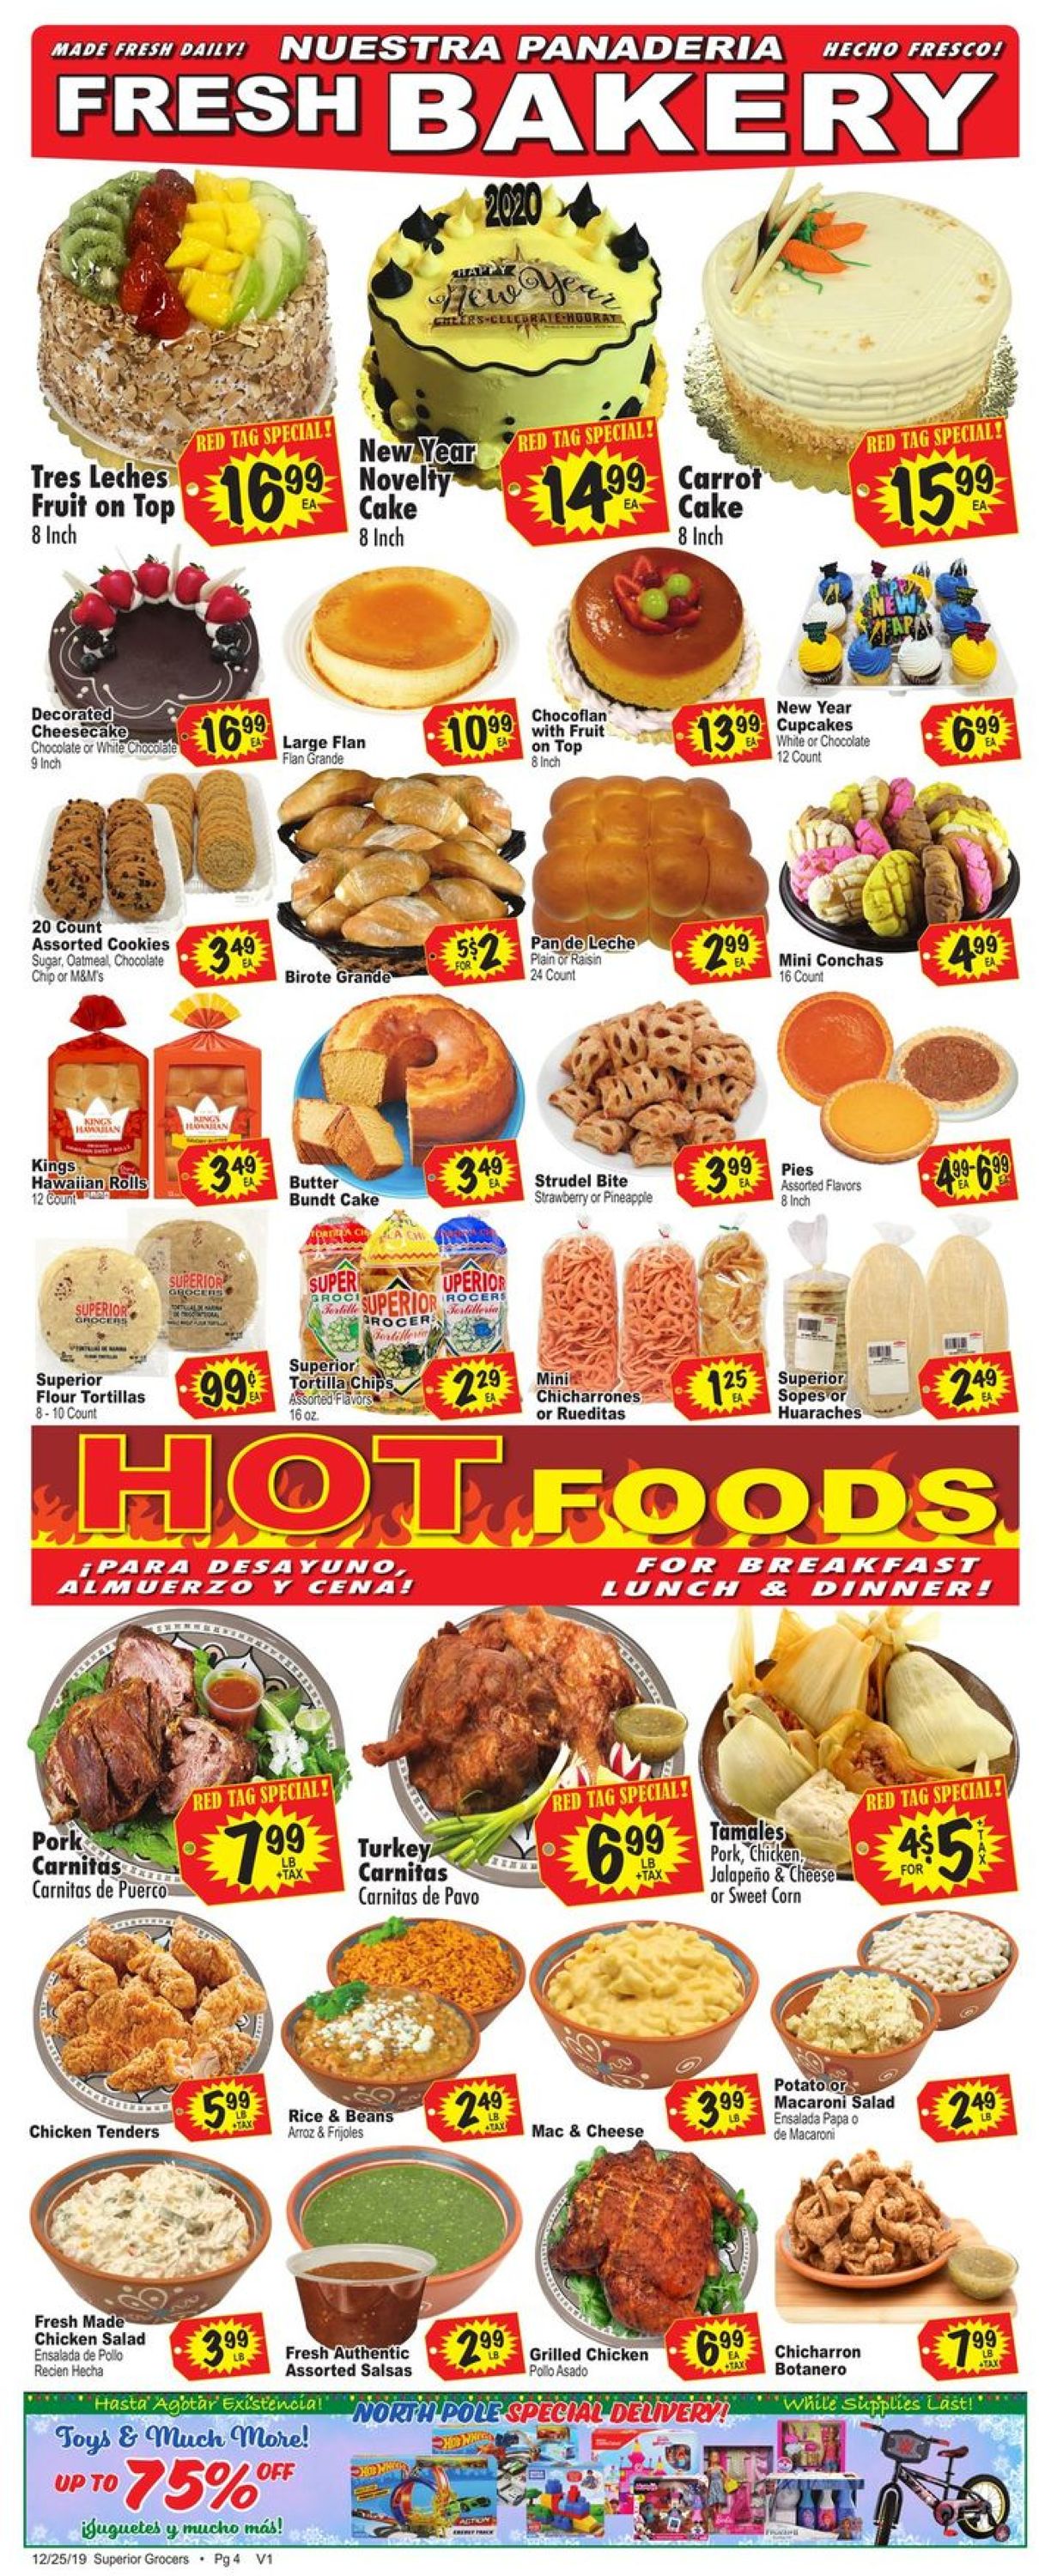 Catalogue Superior Grocers - New Year's Ad 2019/2020 from 12/25/2019